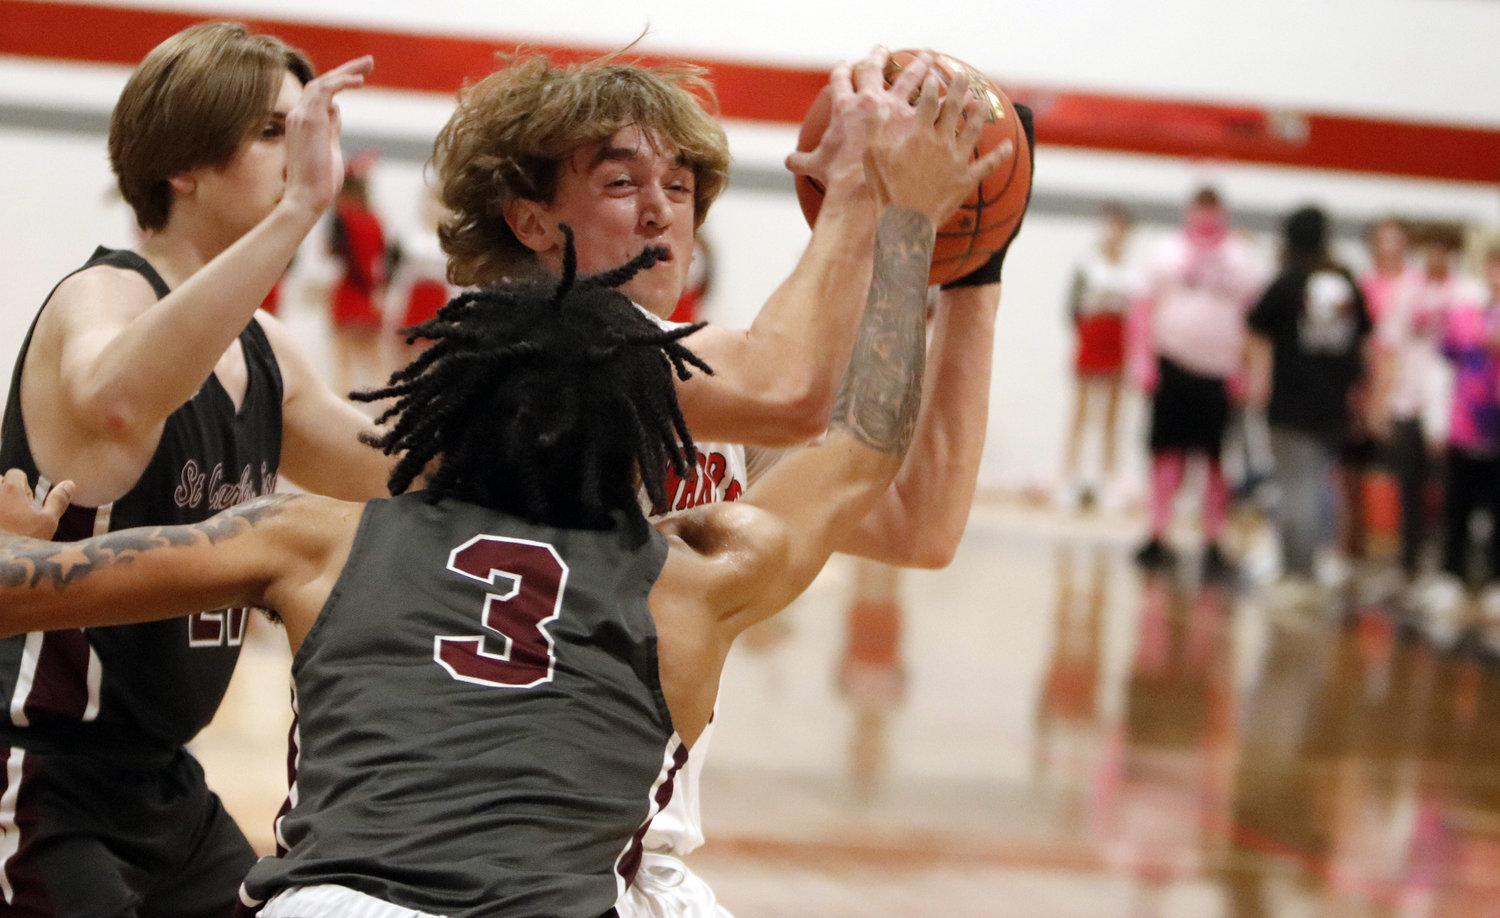 Warrenton senior Kannon Hibbs battles through two St. Charles West defenders during Friday night’s conference matchup at Warrenton High School.